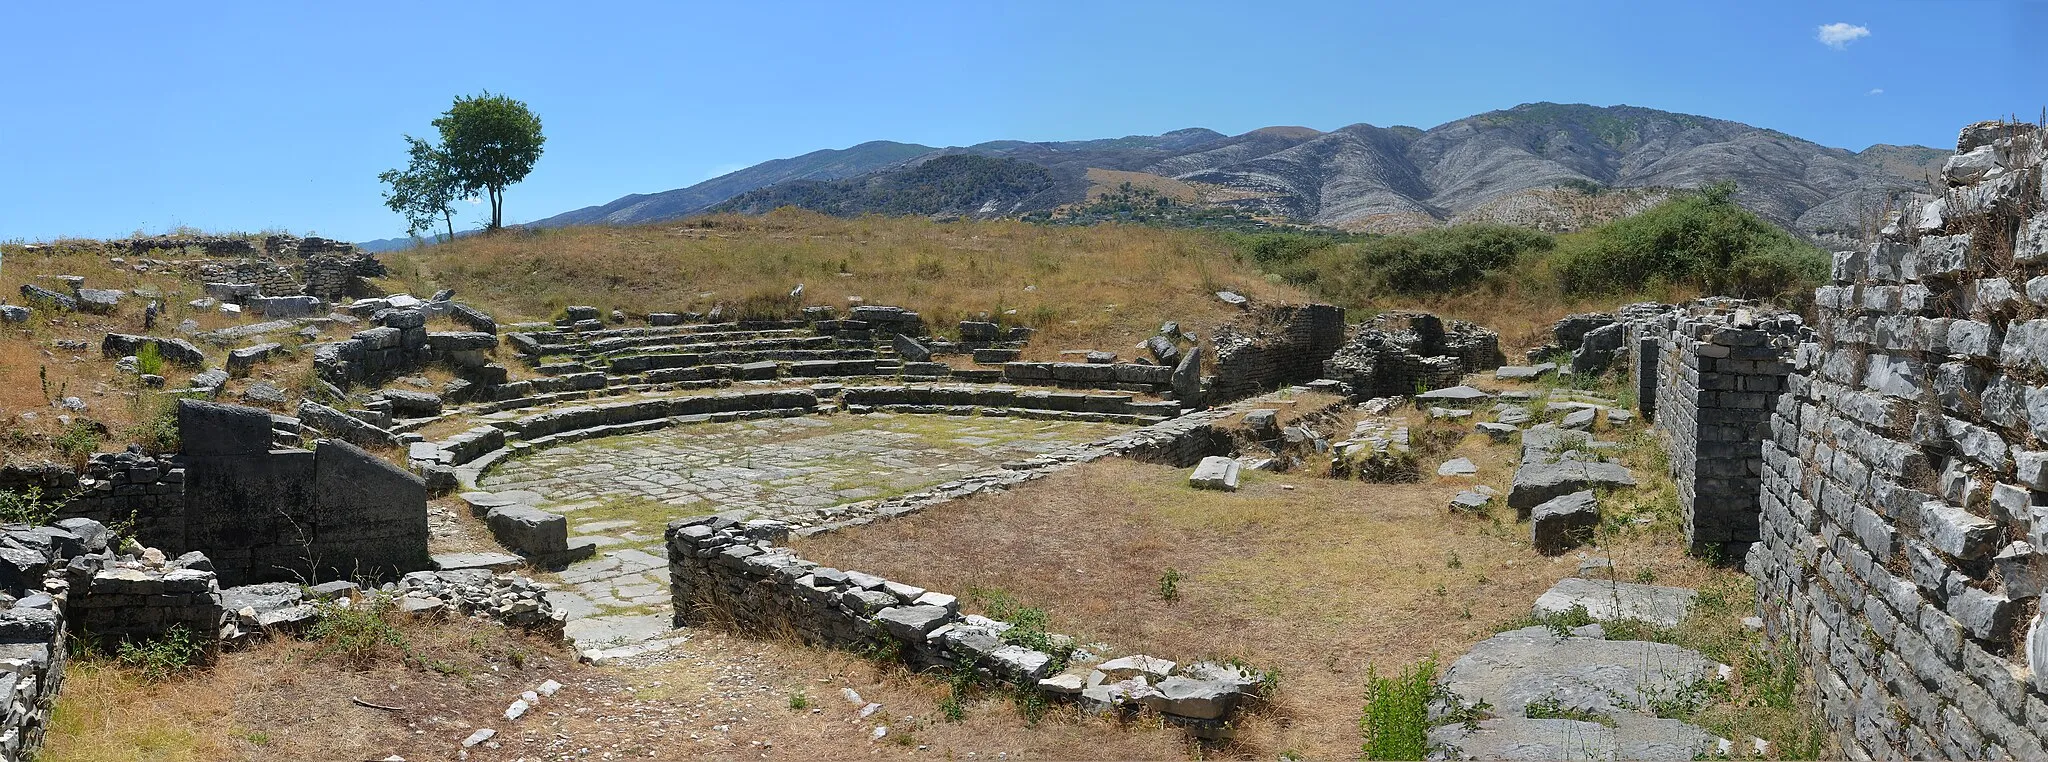 Photo showing: The ruins of the antique theater of Hadrianopolis near Sofratika, Albania